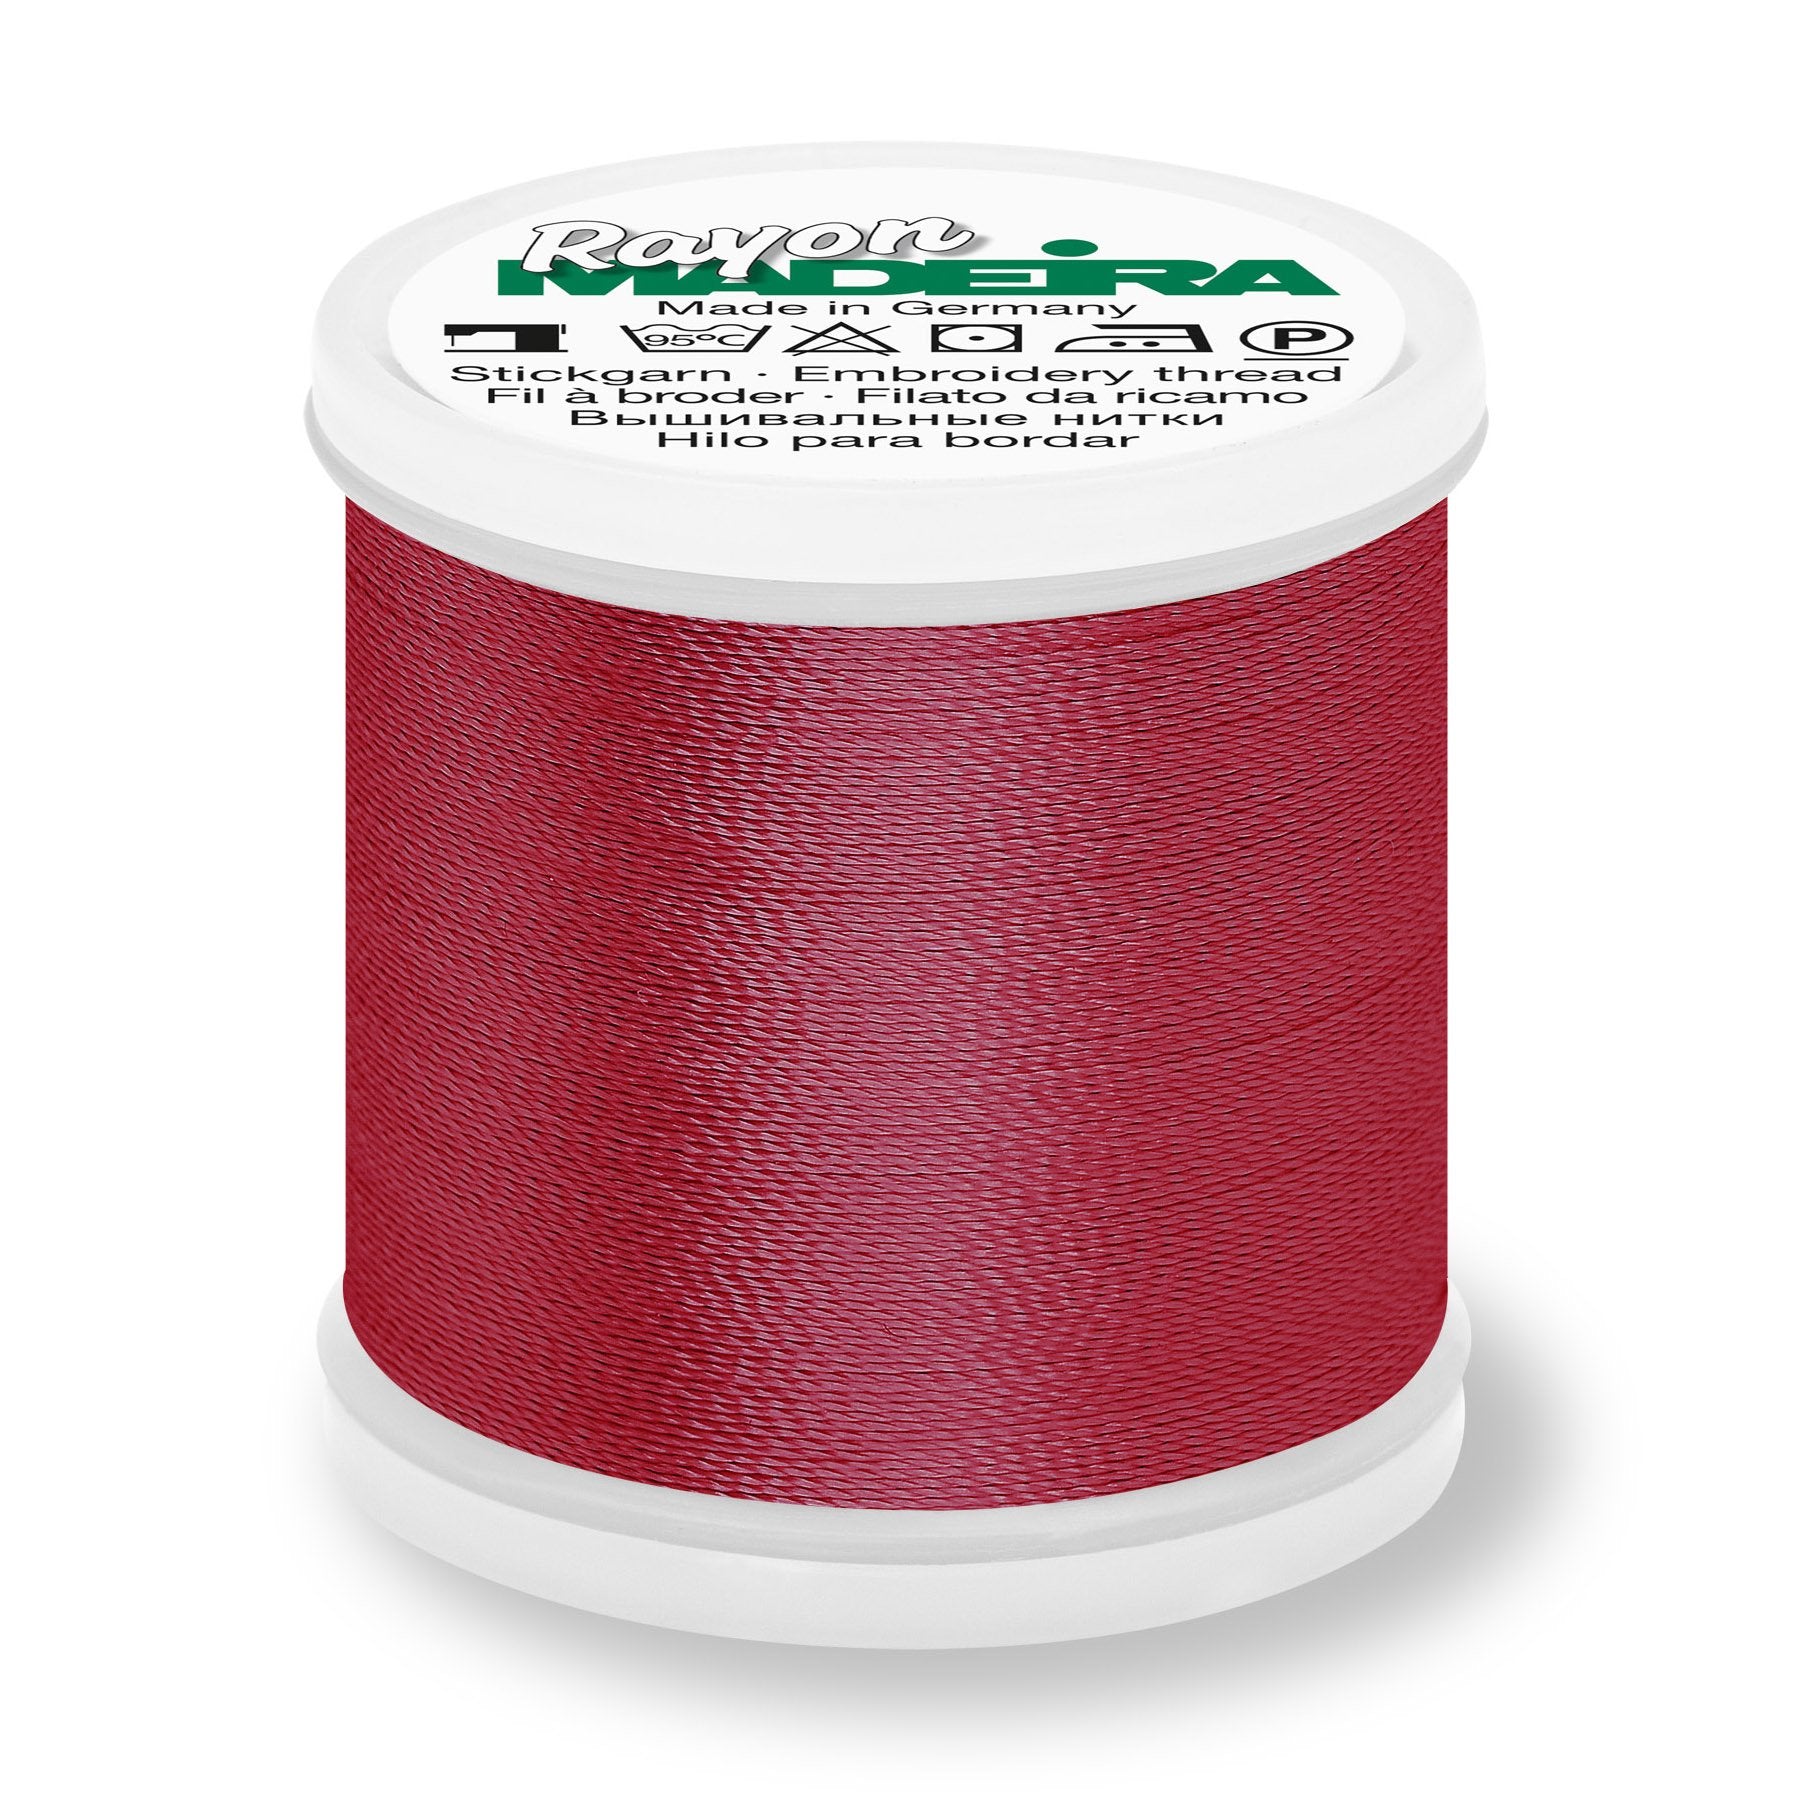 Madeira Rayon 40 Embroidery Thread 200m #1381 Rasberry from Jaycotts Sewing Supplies